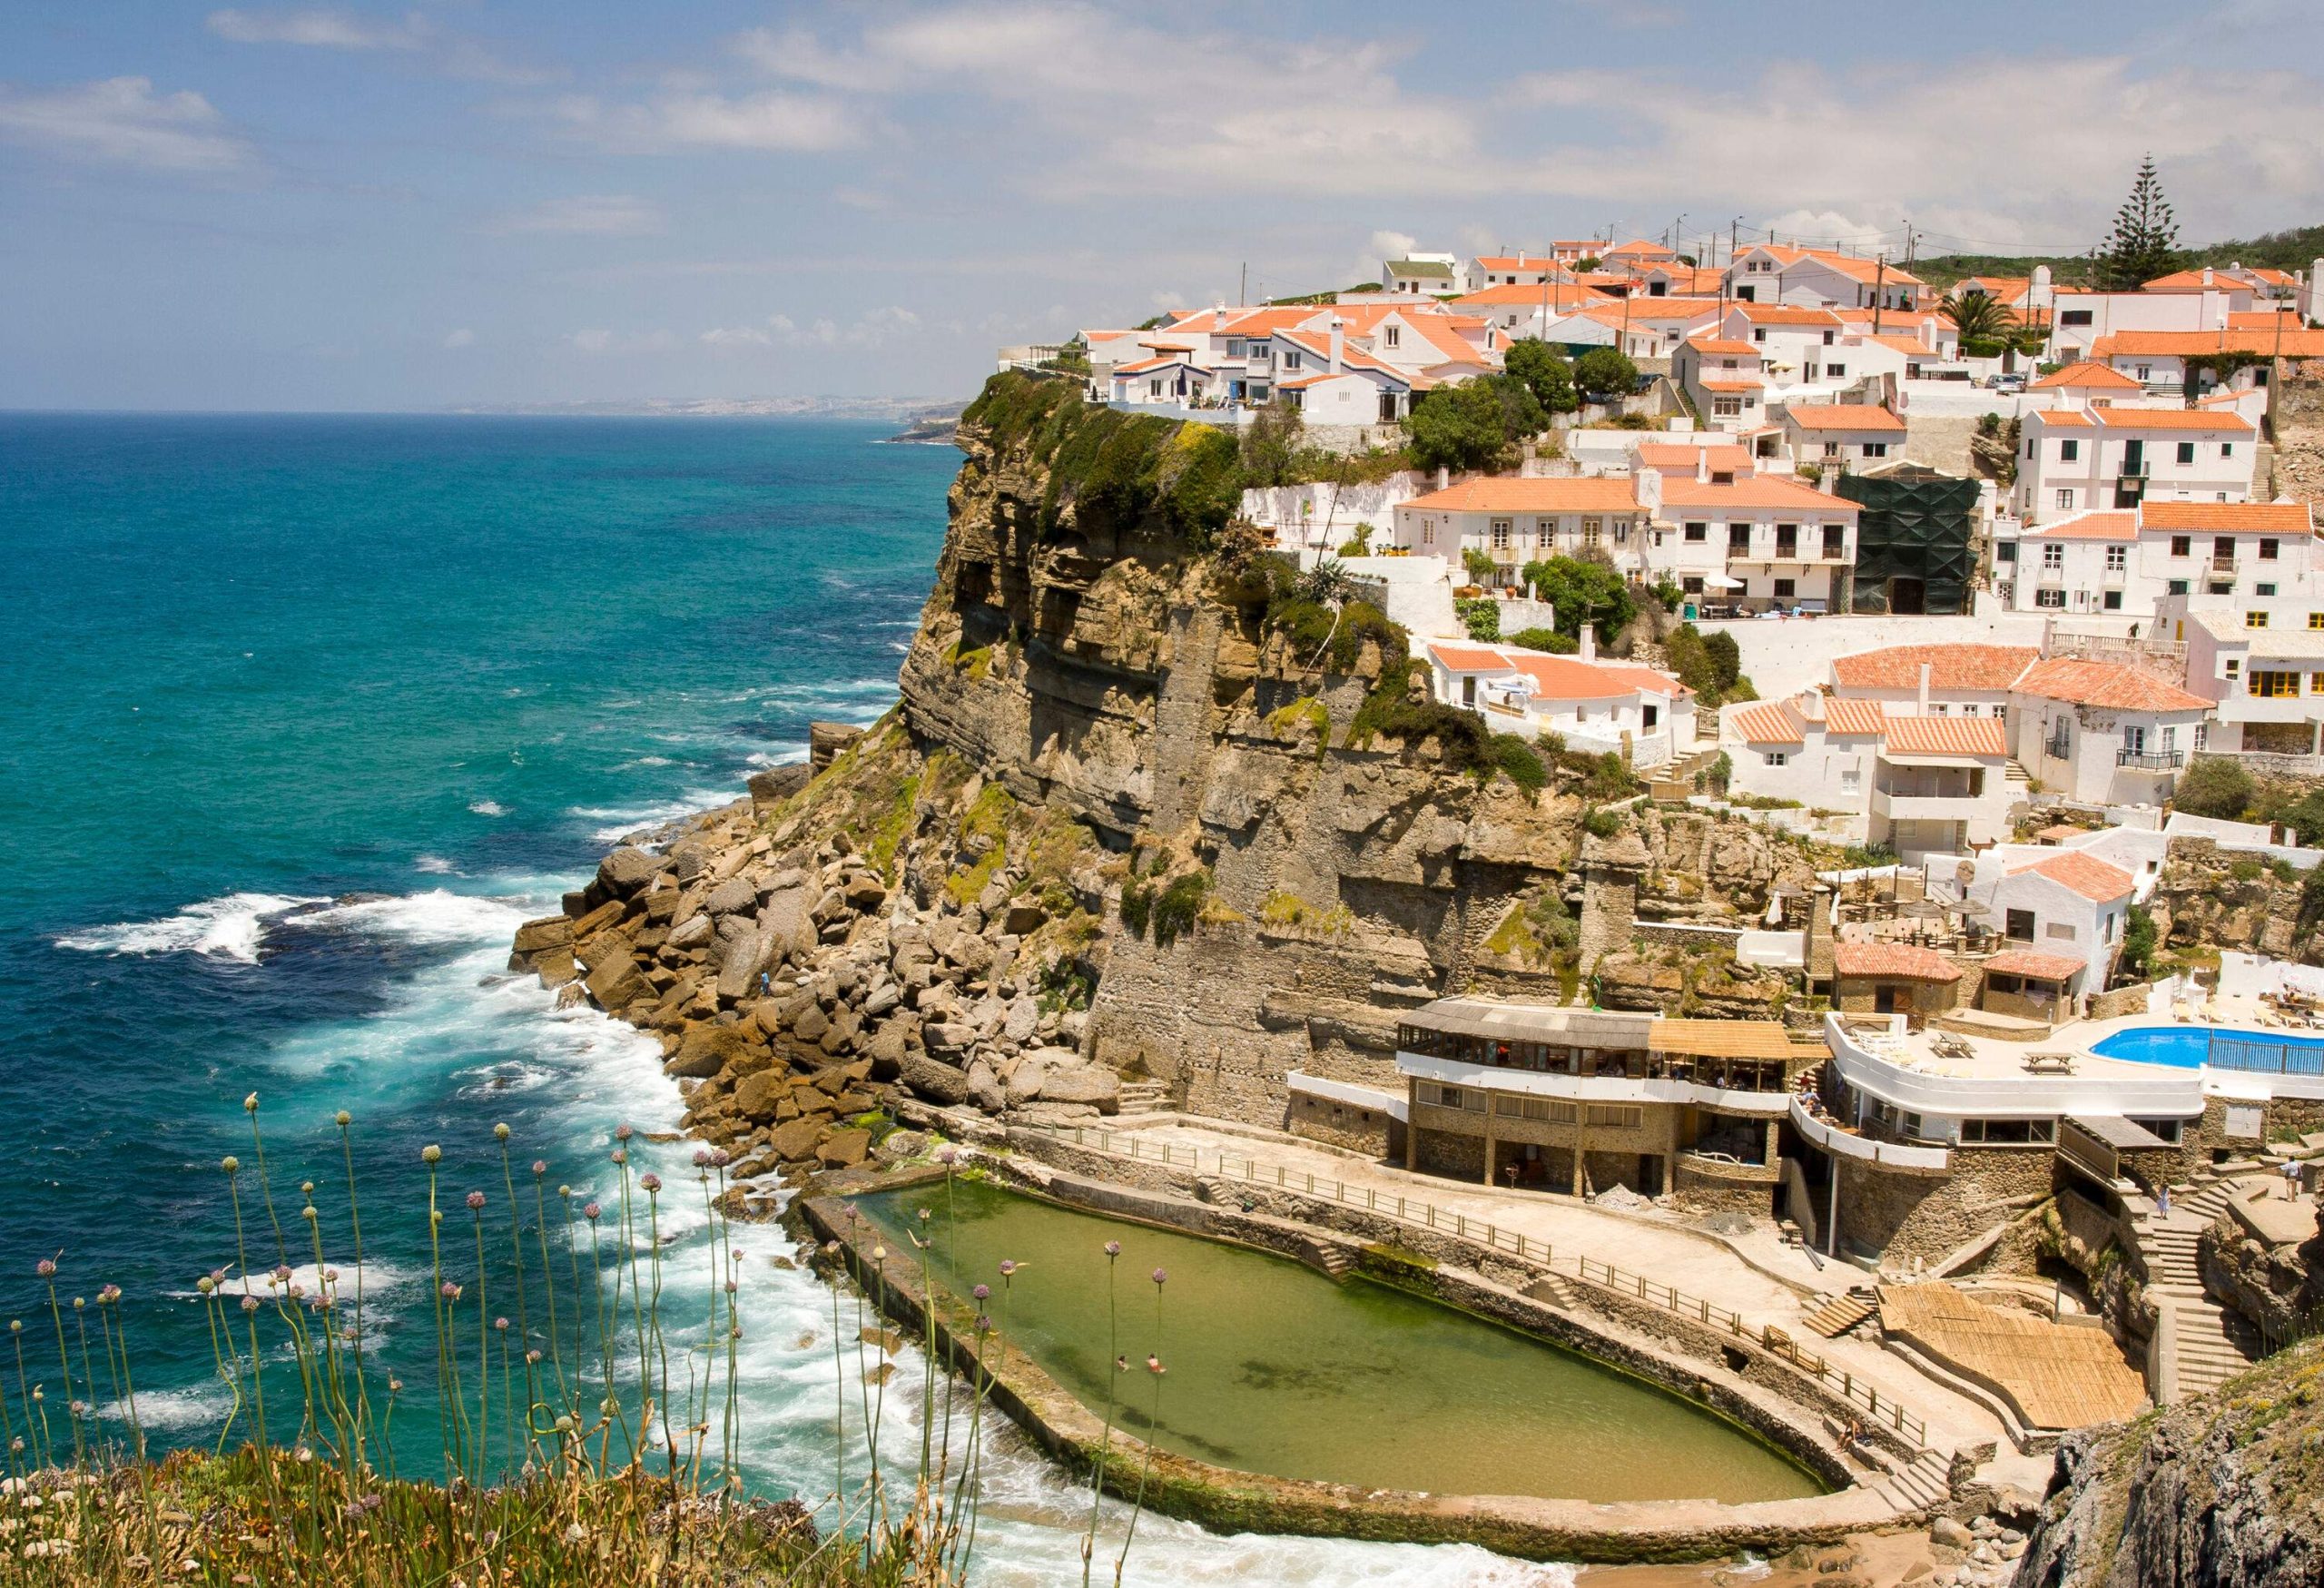 A coastal village of whitewashed buildings perched on a clifftop overlooking the blue sea.